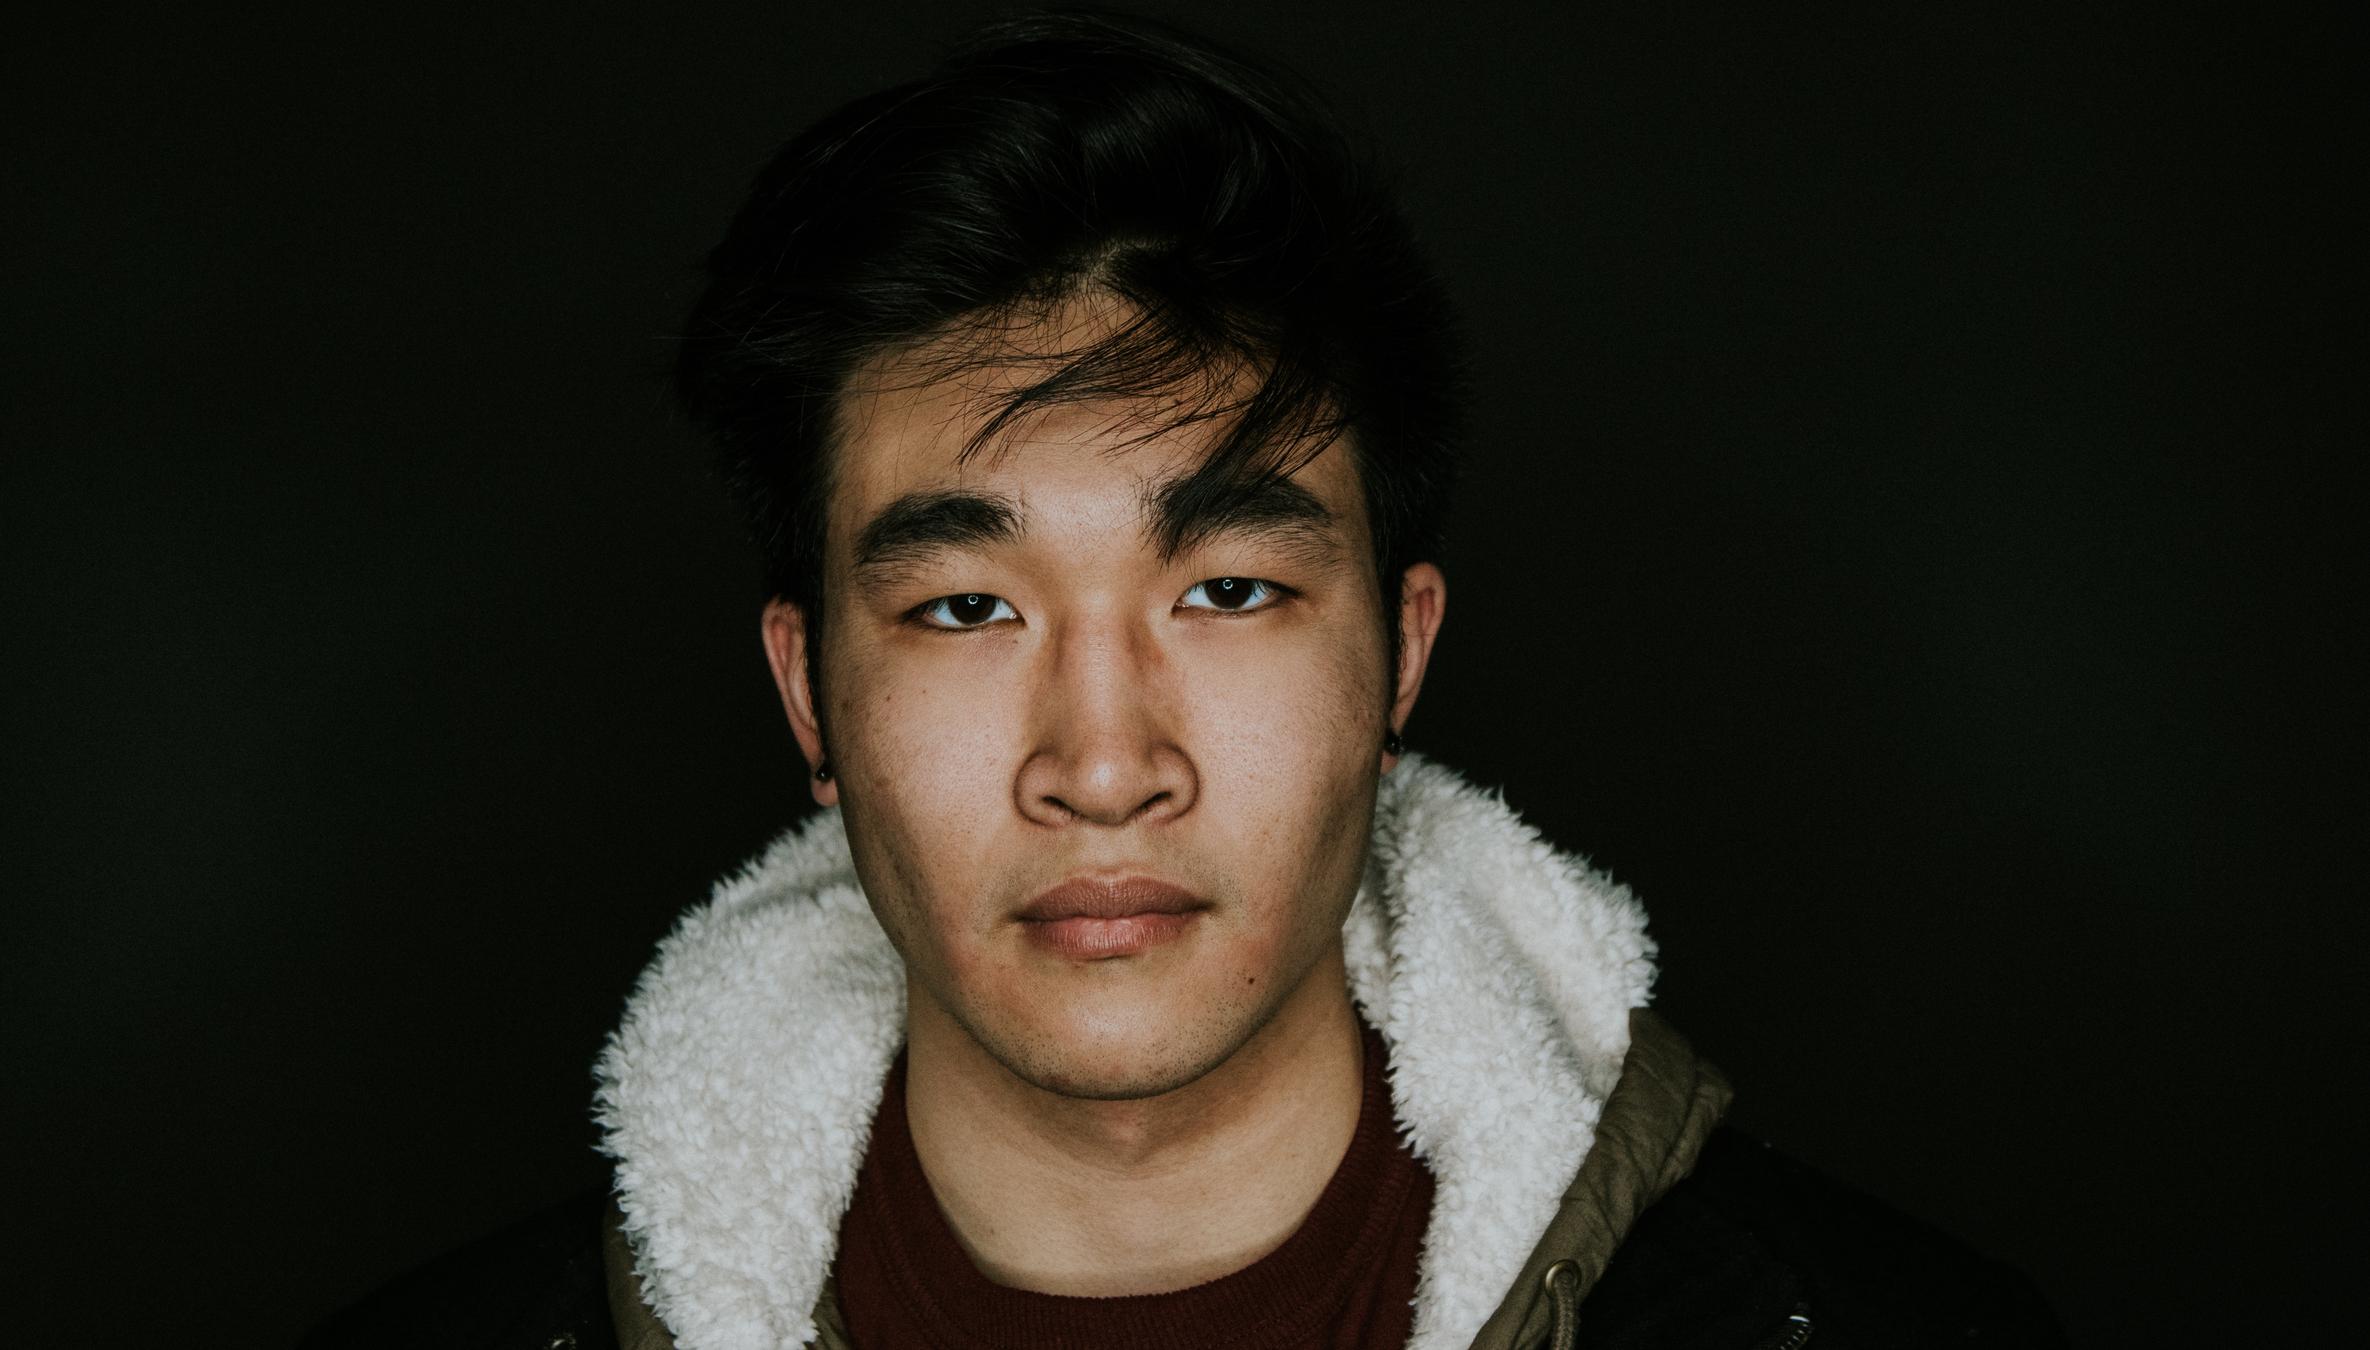 Do You Want to Act in a Short Film About 2 Asian Brothers?